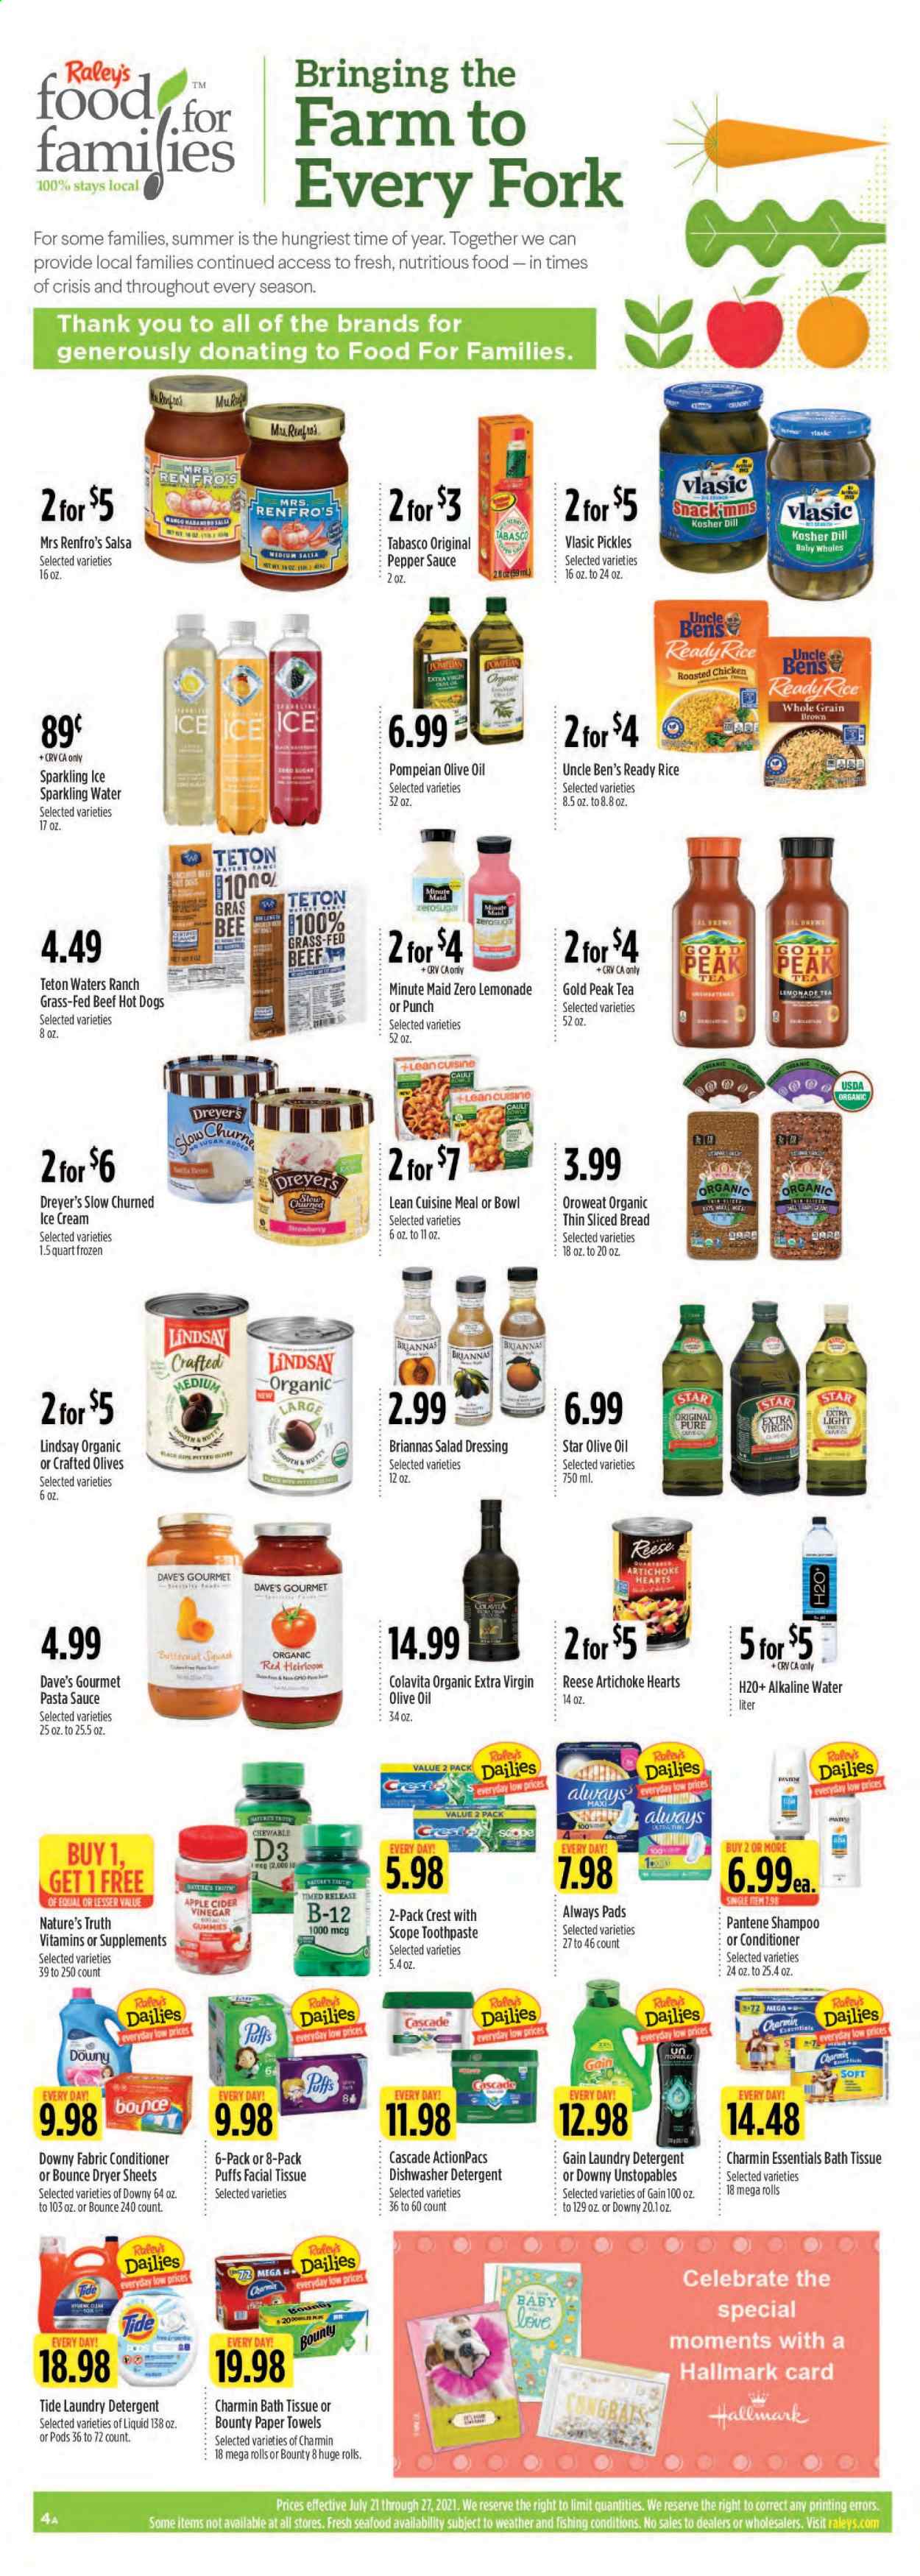 thumbnail - Raley's Flyer - 07/21/2021 - 07/27/2021 - Sales products - bread, puffs, artichoke, seafood, hot dog, chicken roast, pasta sauce, sauce, Lean Cuisine, ice cream, Bounty, gram flour, tabasco, pickles, olives, Uncle Ben's, rice, dill, pepper, salad dressing, dressing, salsa, apple cider vinegar, extra virgin olive oil, vinegar, olive oil, oil, lemonade, Gold Peak Tea, fruit punch, sparkling water, alkaline water, tea, gin, bath tissue, kitchen towels, paper towels, Charmin, detergent, Gain, Cascade, Tide, Unstopables, laundry detergent, Bounce, dryer sheets, Downy Laundry, shampoo, toothpaste, Crest, Always pads, Pantene, Nature's Truth, vitamin D3. Page 5.